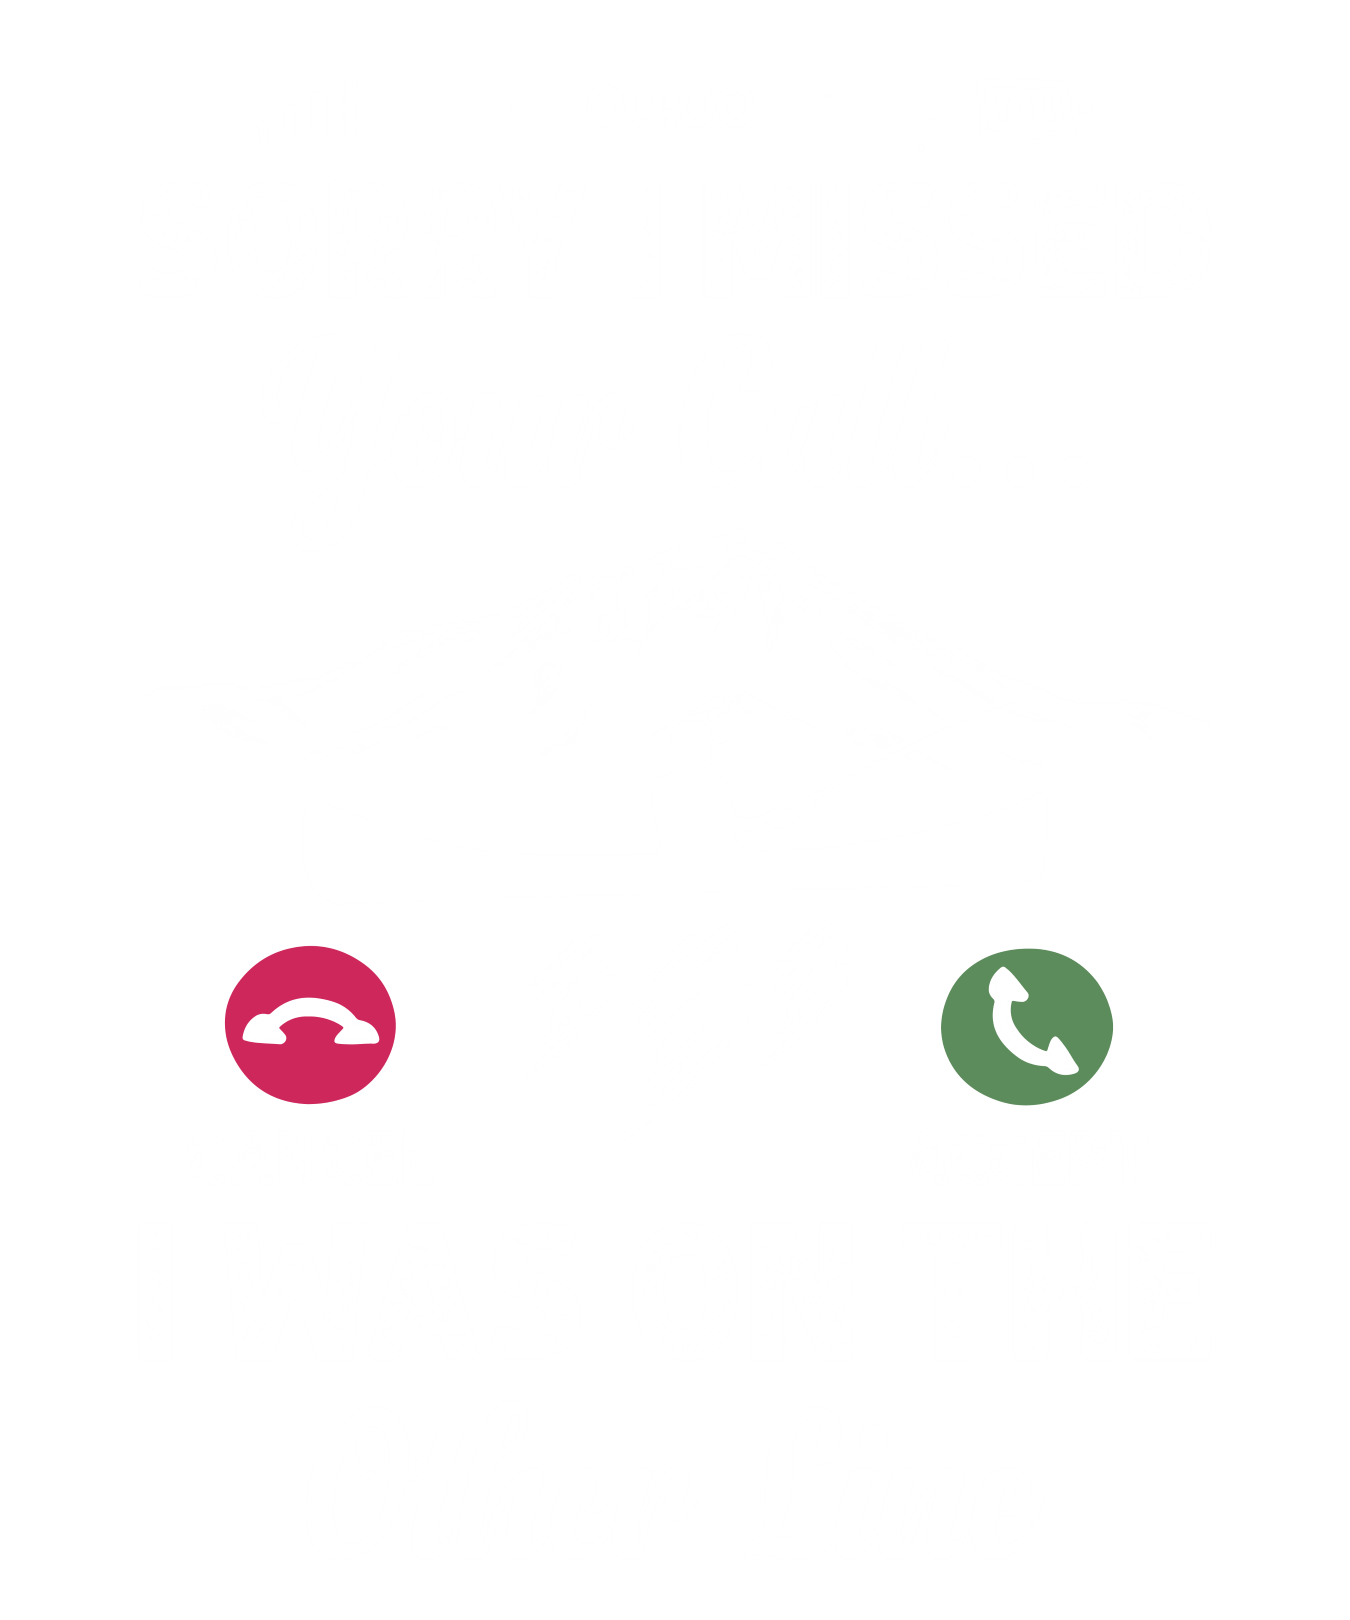 SORRY I MISSED YOUR CALL. ON THE OTHER LINE